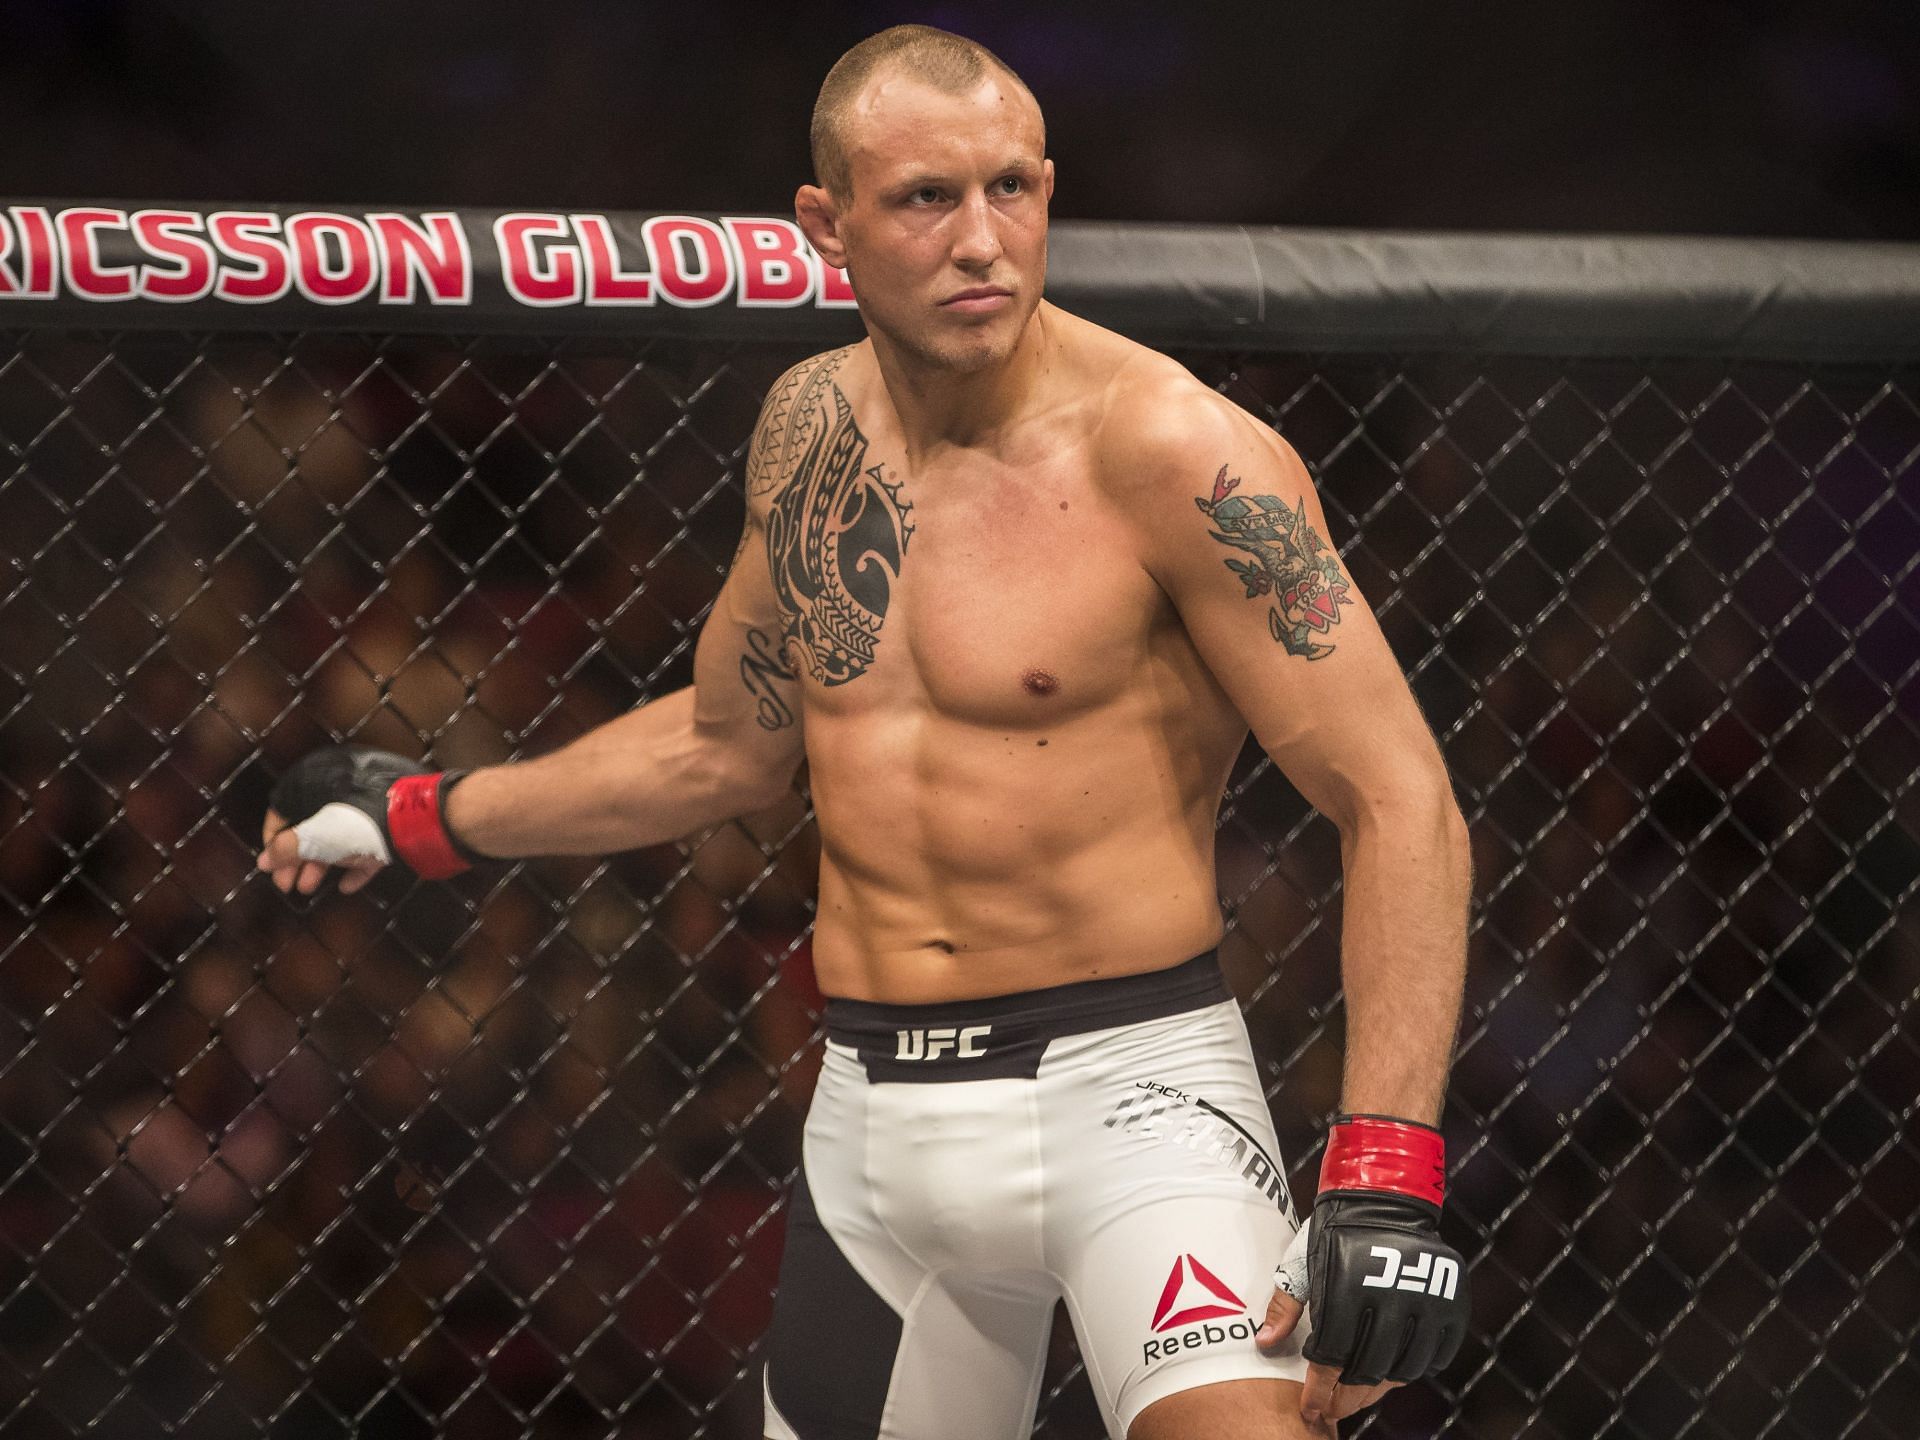 Jack Hermansson holds a record of 22-7